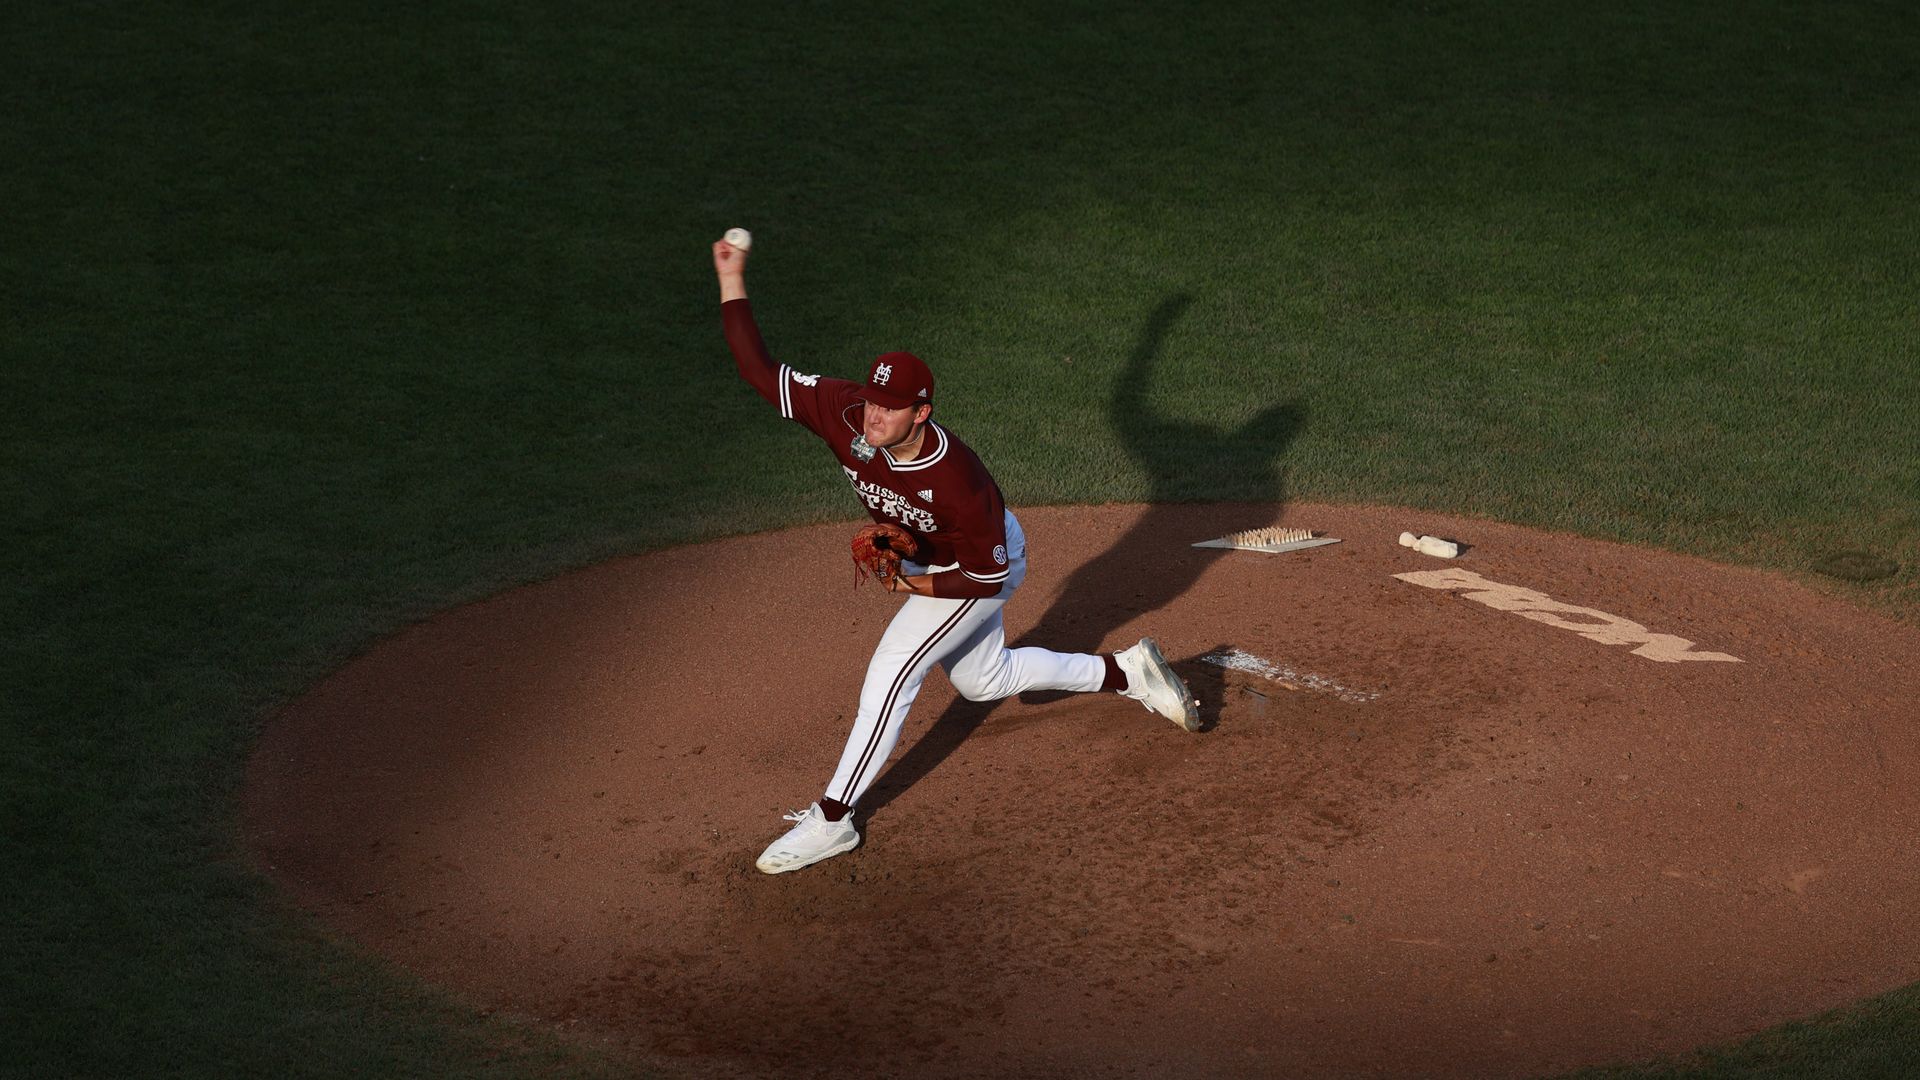 Will Bednar of the Mississippi St. Bulldogs pitches against the Vanderbilt Commodores during the Division I Men's Baseball Championship in June 2021.